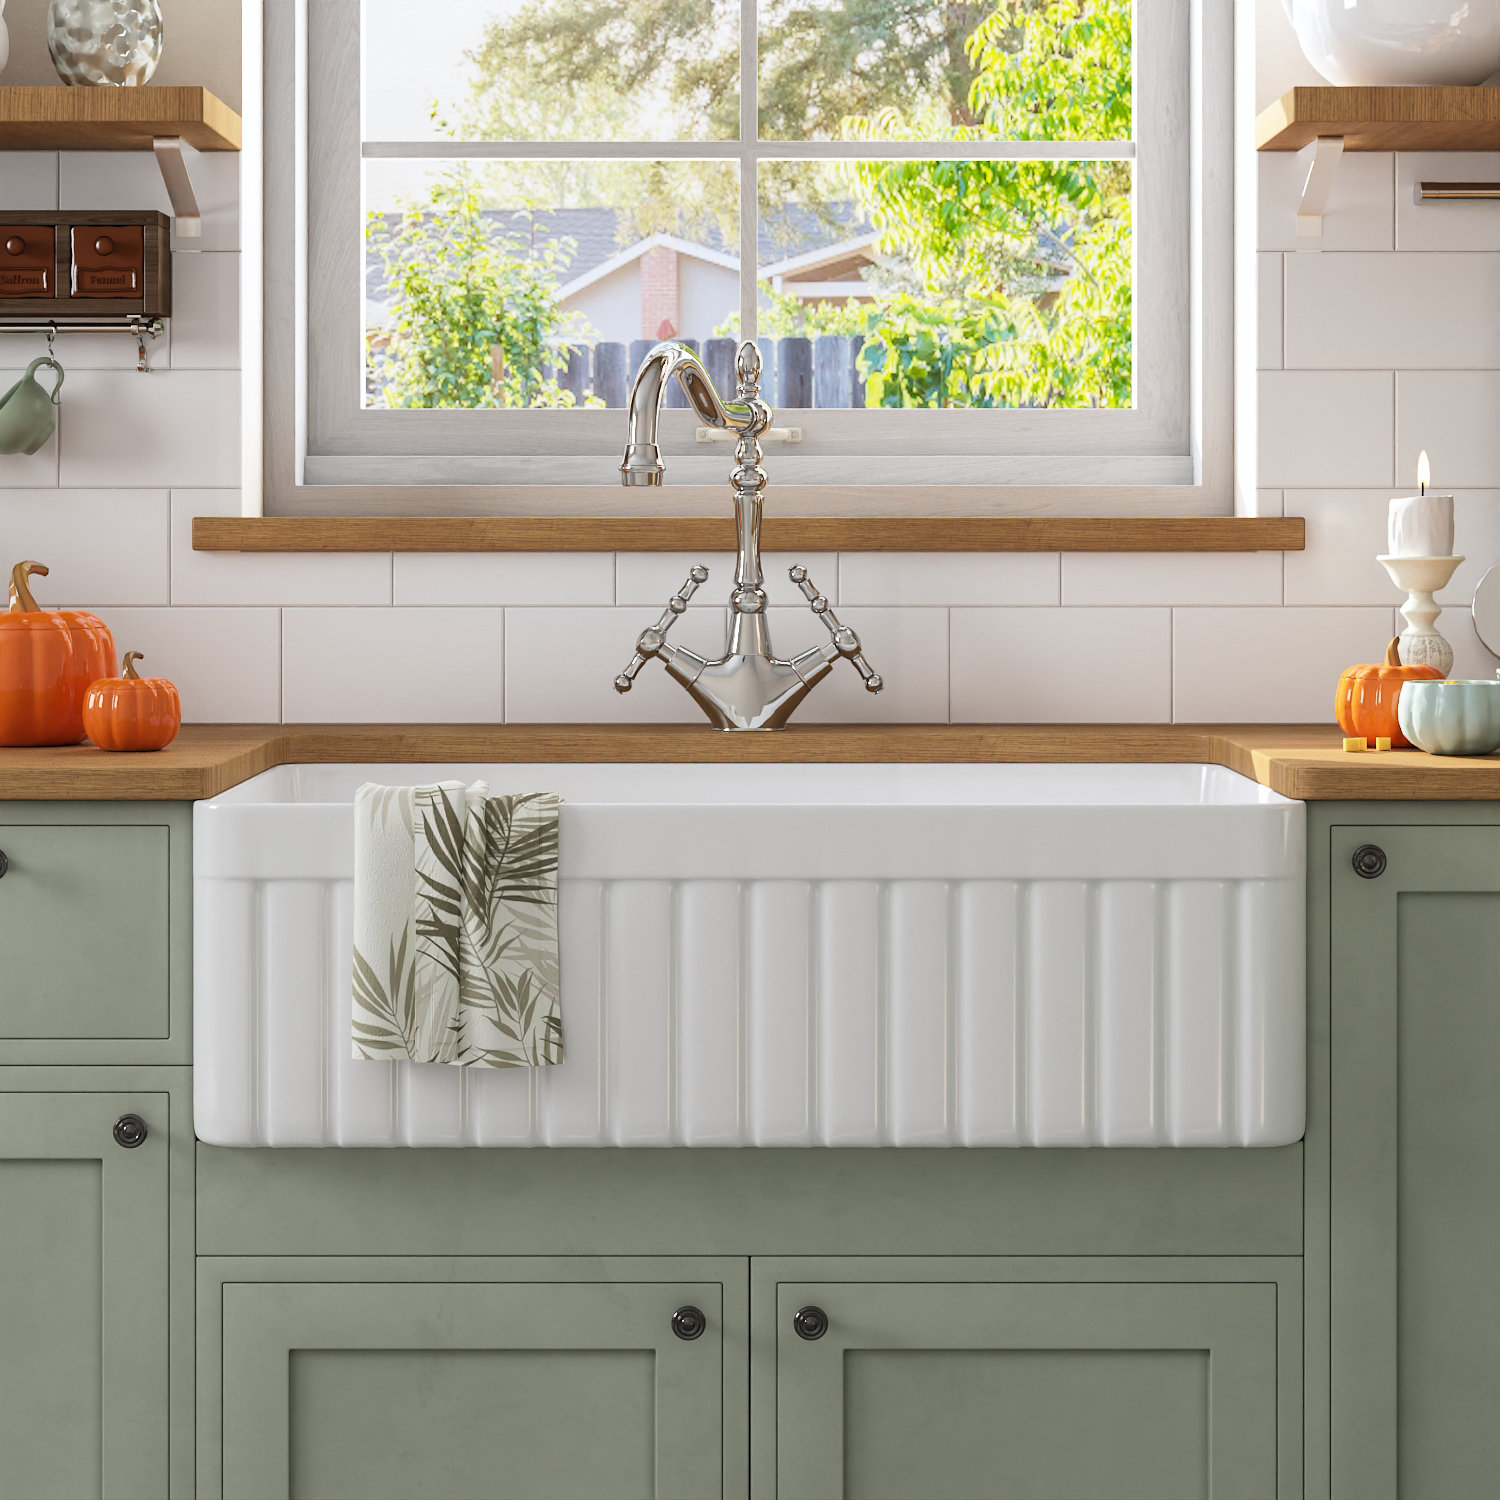 DeerValley Solstice White Fireclay 33 in. L x 18 in. W Rectangular Single Bowl Farmhouse Apron Kitchen Sink with Grid and Strainer DV-1K502